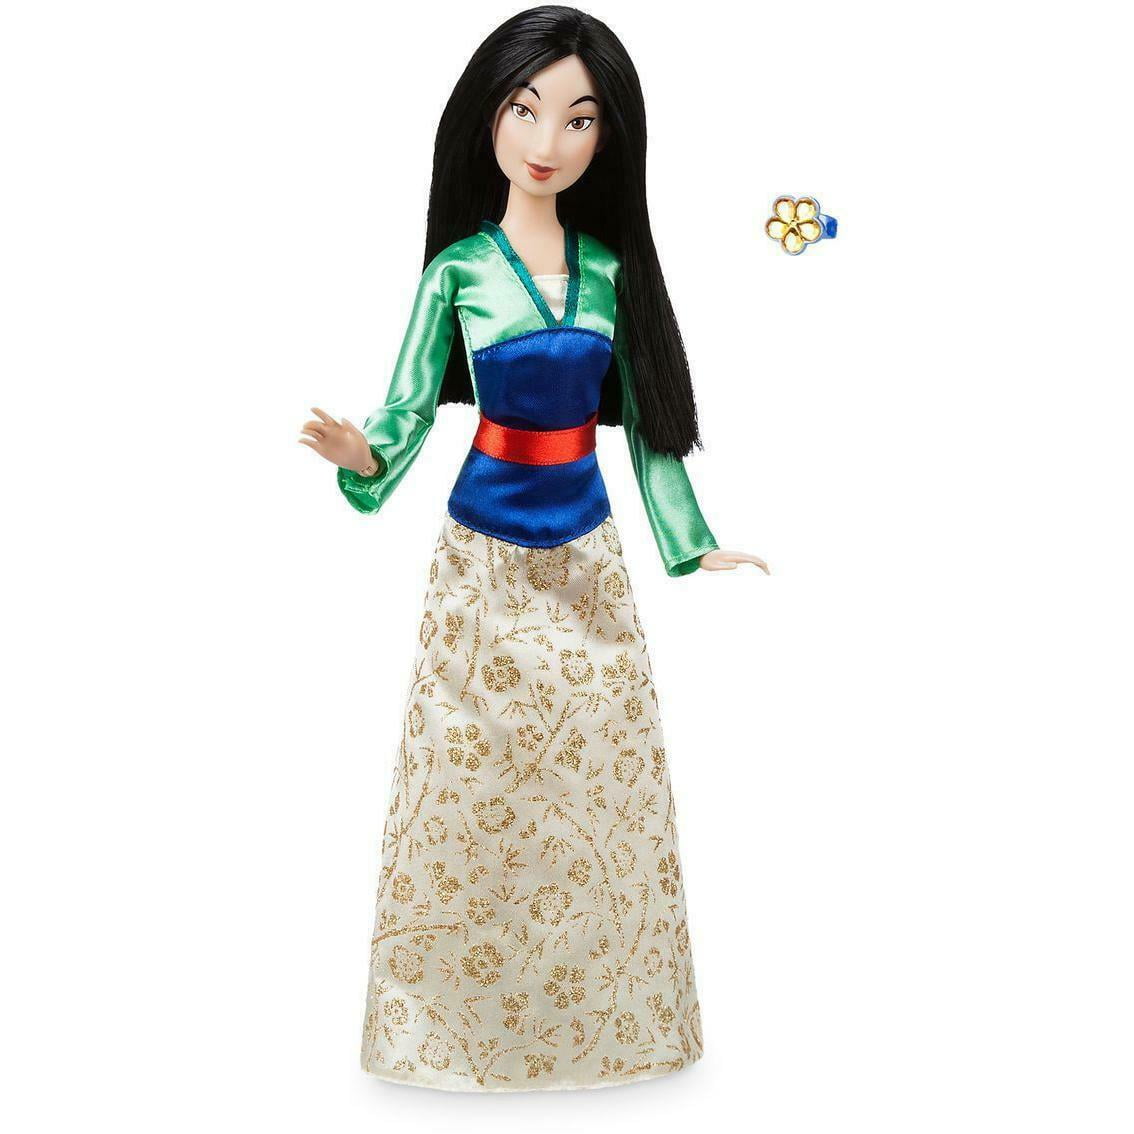 Store Mulan Princess Fully Poseable Doll with Ring 11 1/2" H - Walmart.com